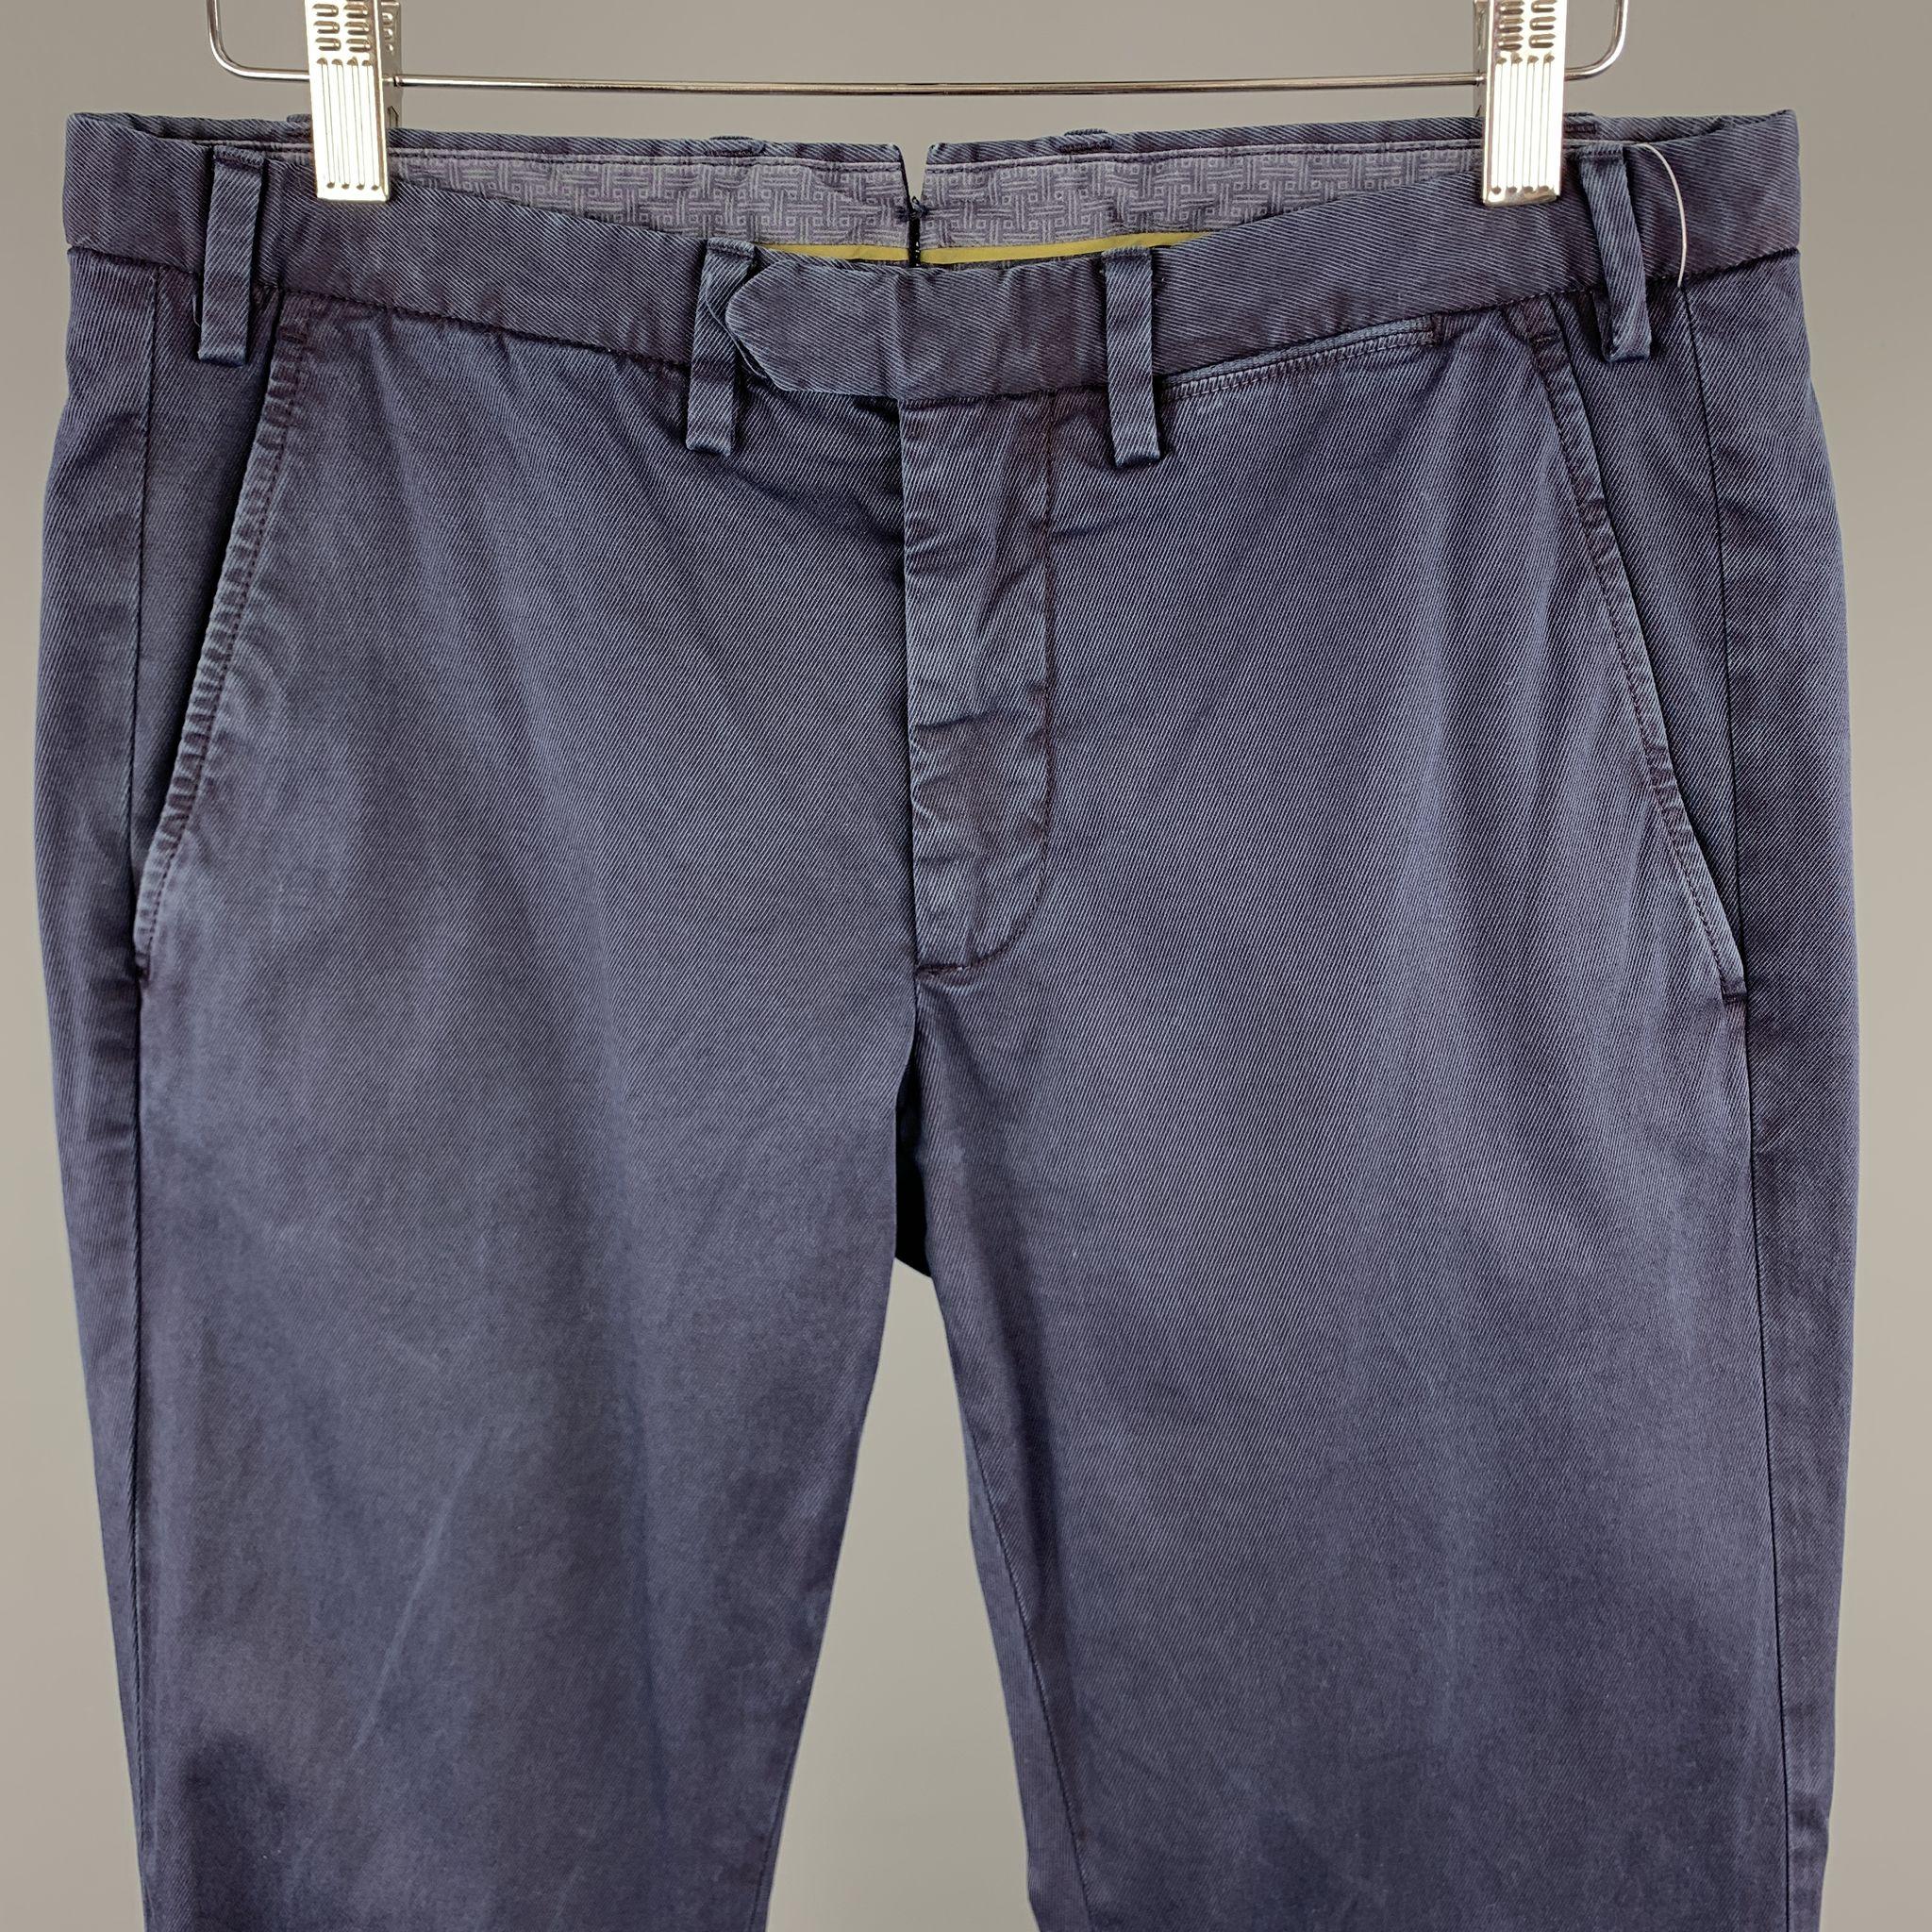 EREDI PISANO Casual Pants comes in a navy cotton featuring a flat front style and a zip fly closure. Made in Italy. 

Very Good Pre-Owned Condition.
Marked: 46

Measurements:

Waist: 28 in. 
Rise: 8 in. 
Inseam: 30 in. 